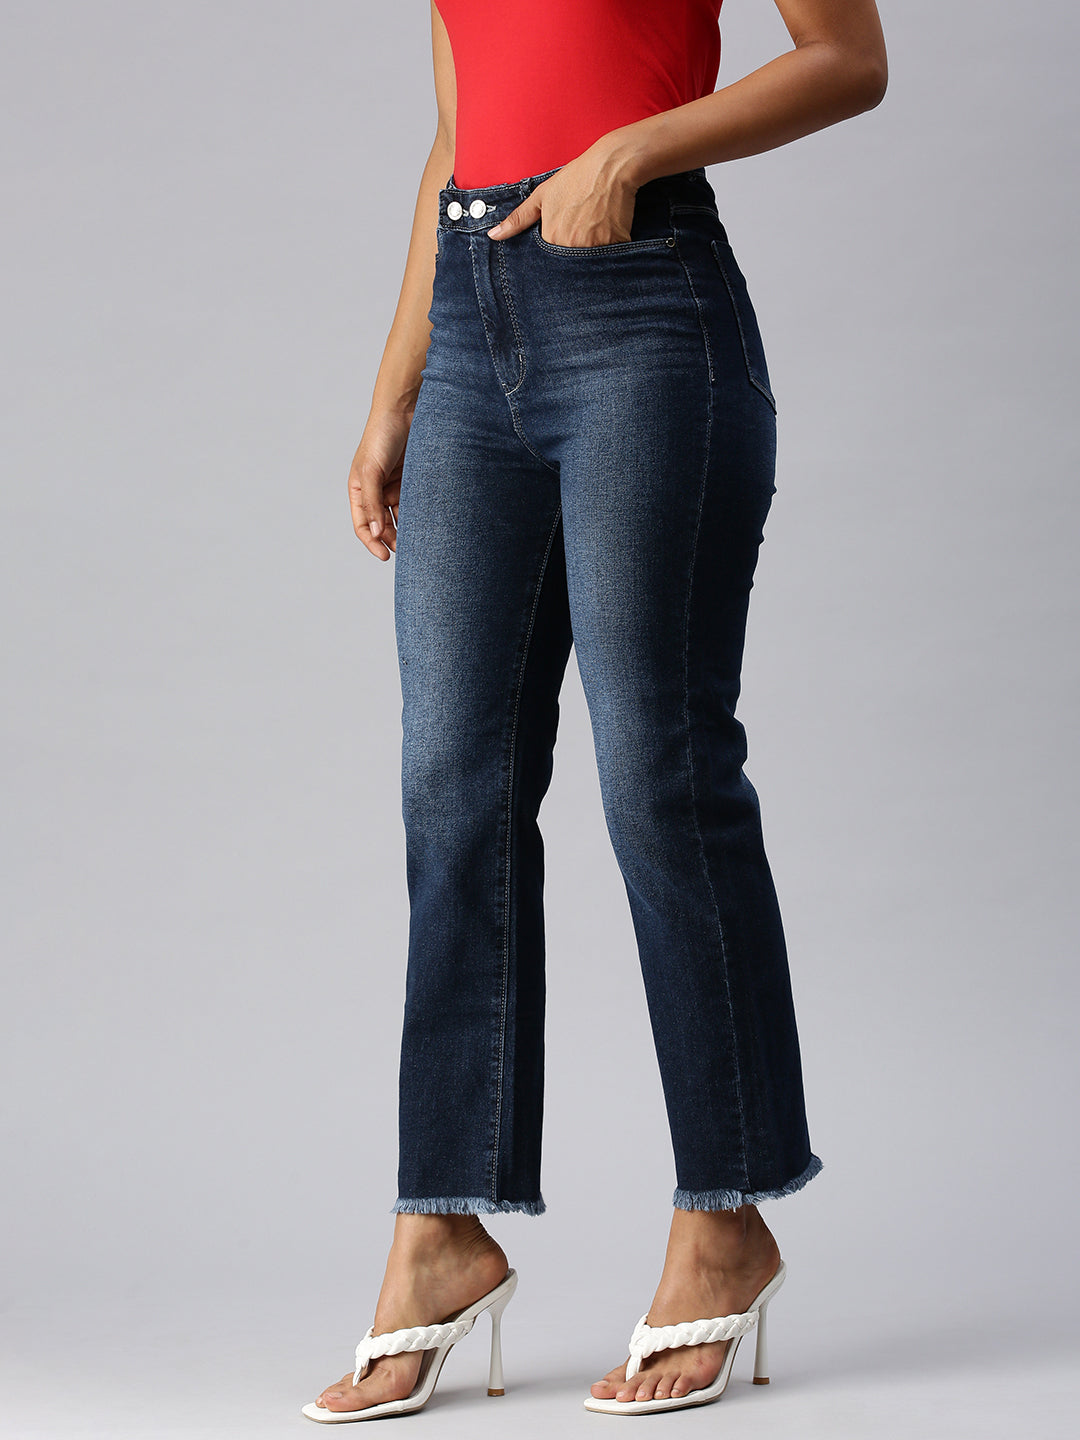 Women's Navy Blue Solid Straight Fit Denim Jeans